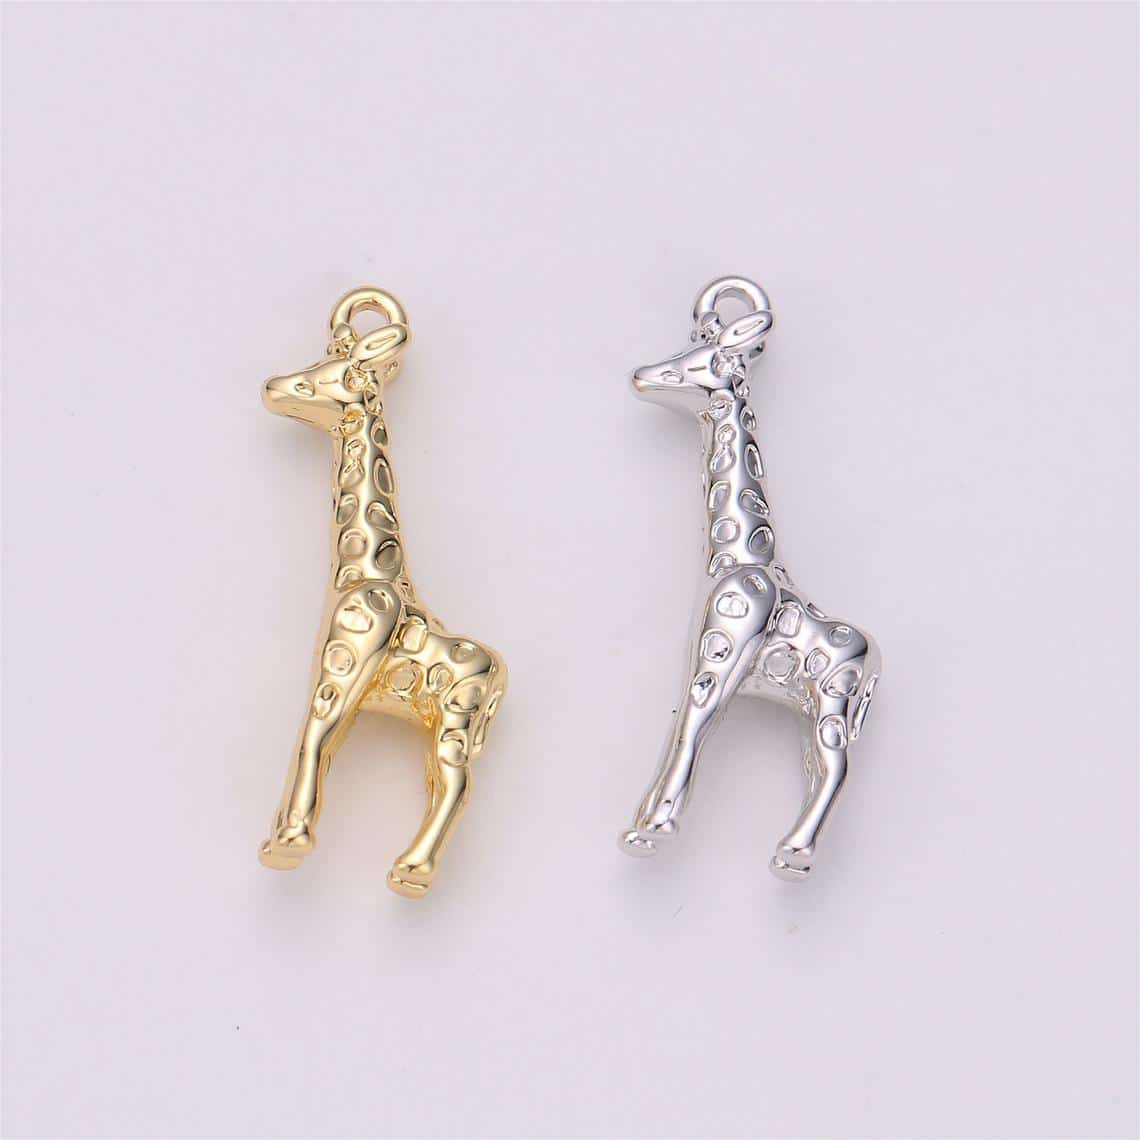 Most Charming Gold and Silver Giraffe Charm